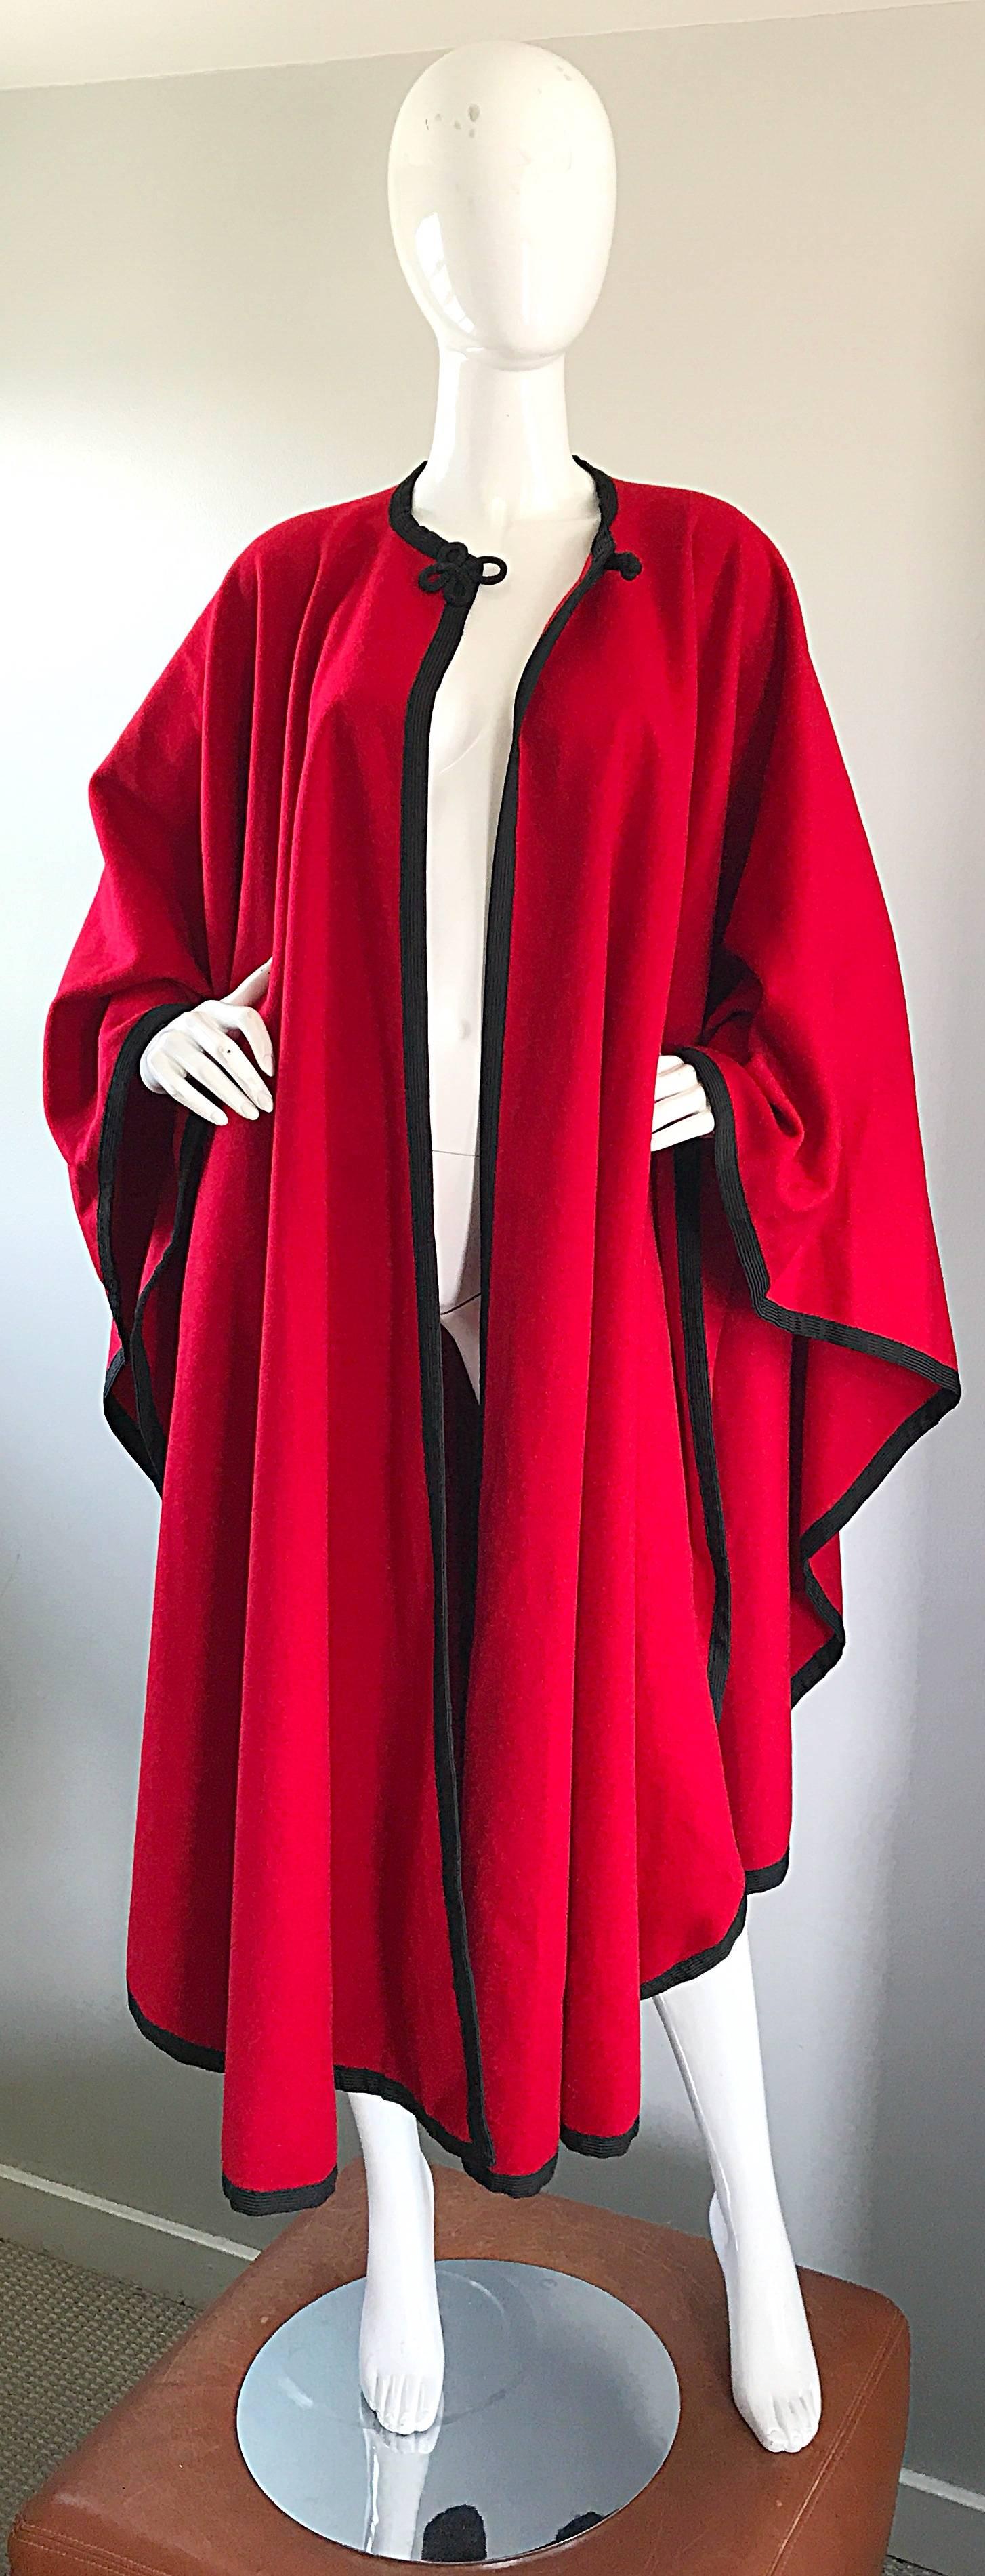 Rare Vintage Yves Saint Laurent Russian Collection 1970s Red Wool Cape Jacket 1